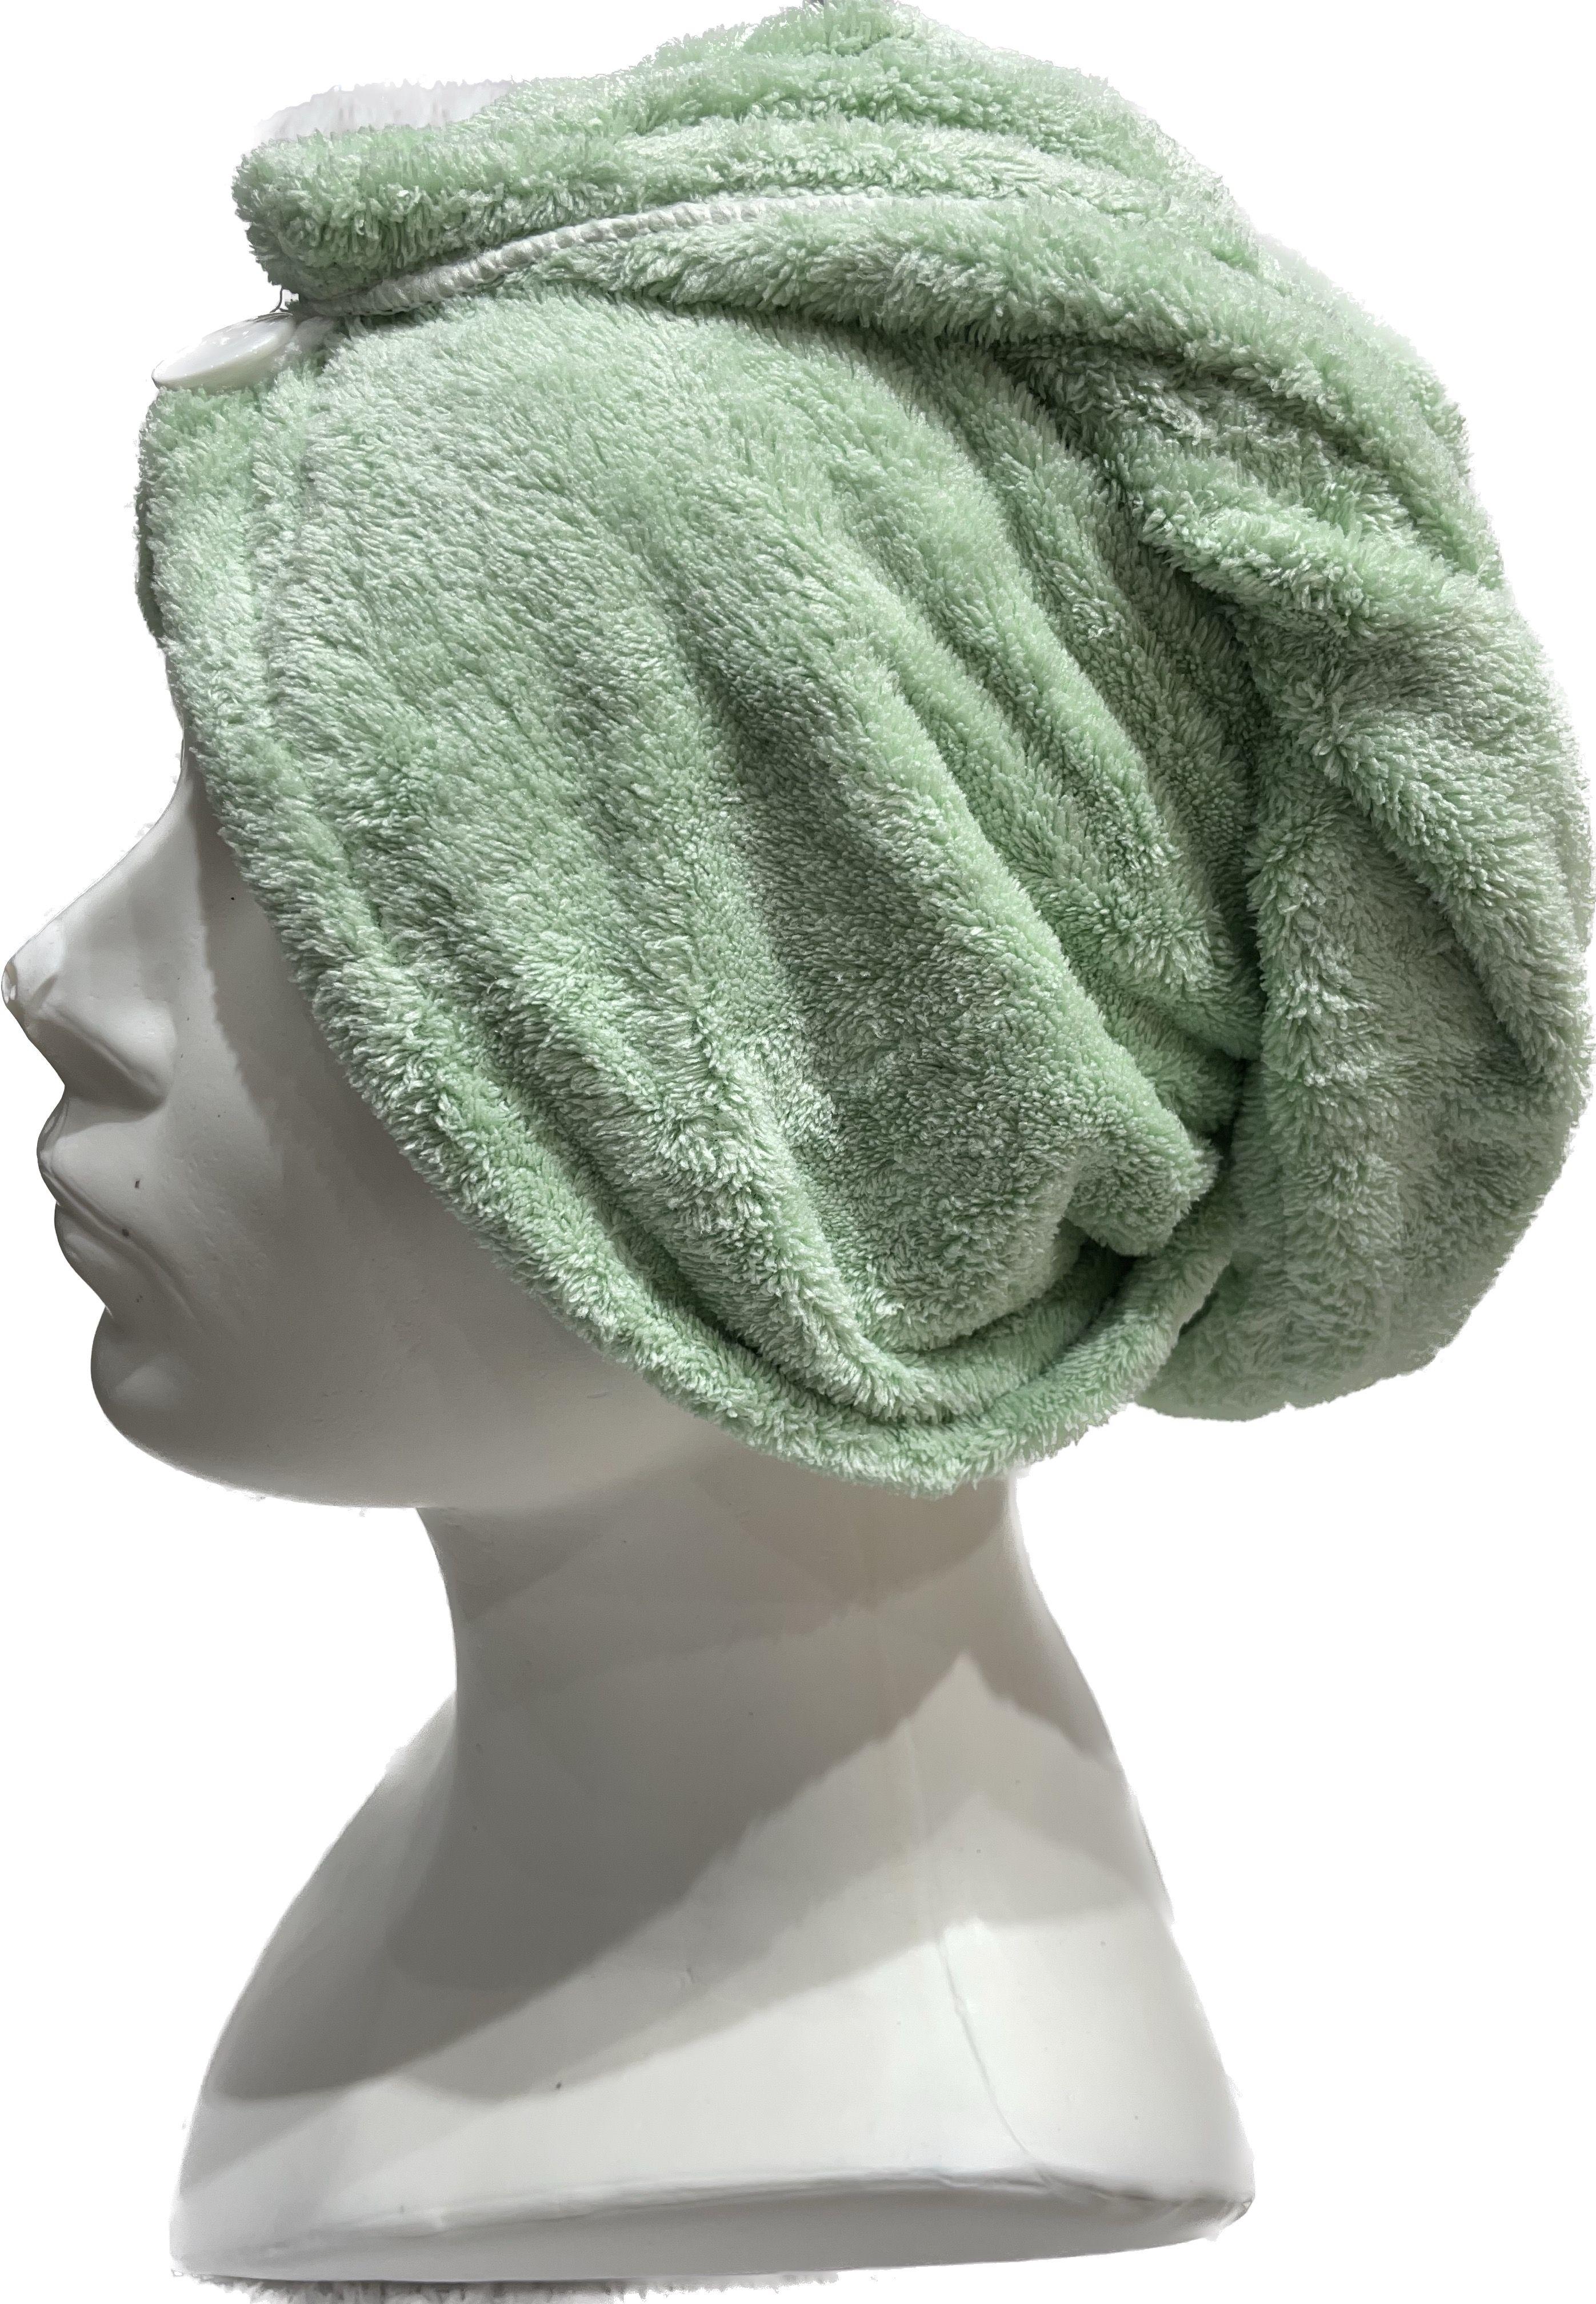 Super absorbent hair towel, hair turban, mix of colors